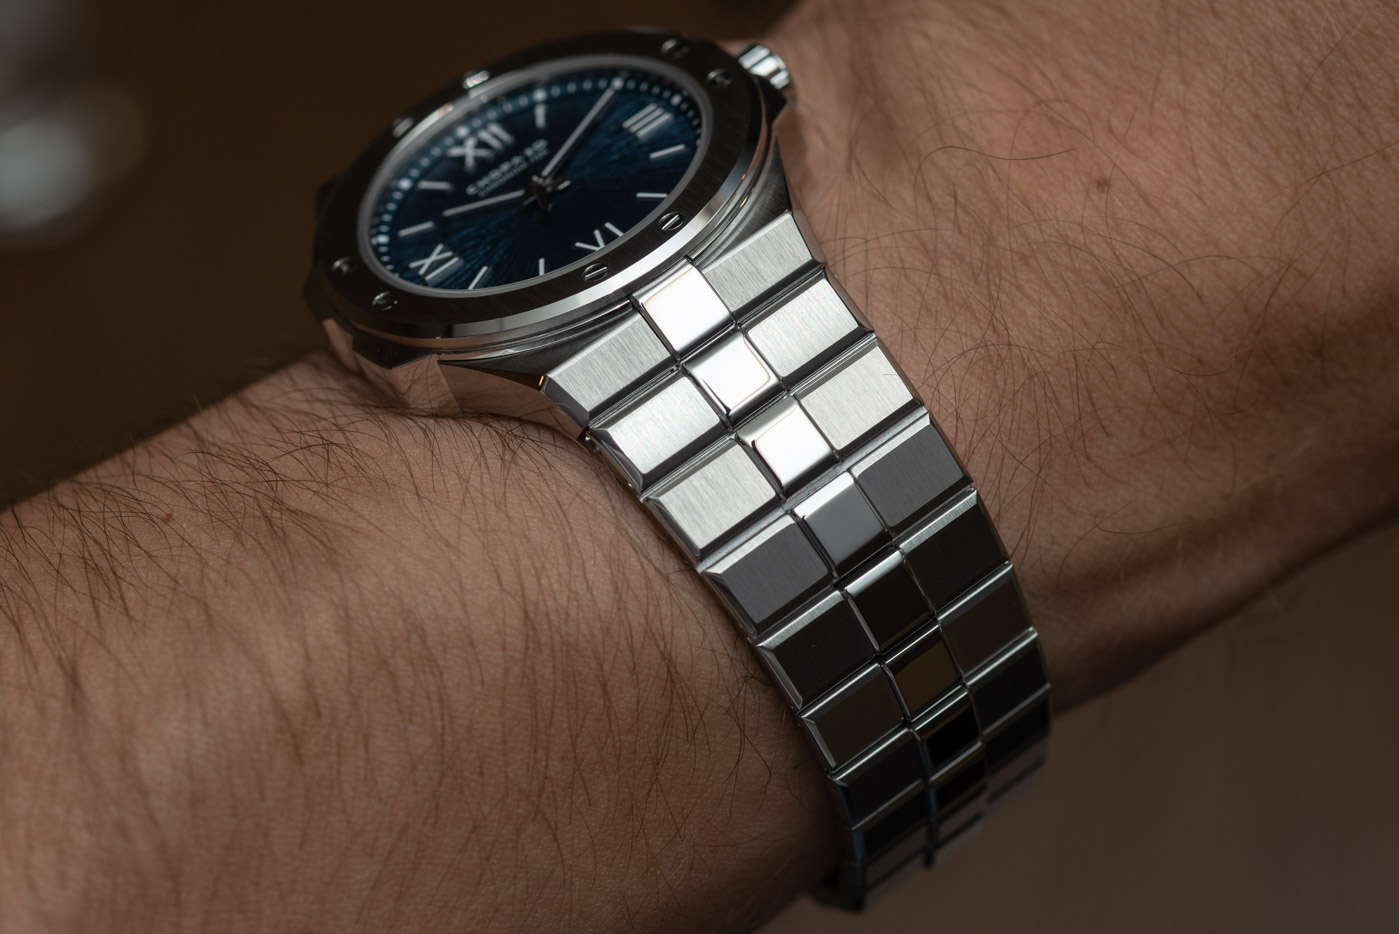 Chopard Alpine Eagle Luxury Sports Watch Collection - Hands-On, Price